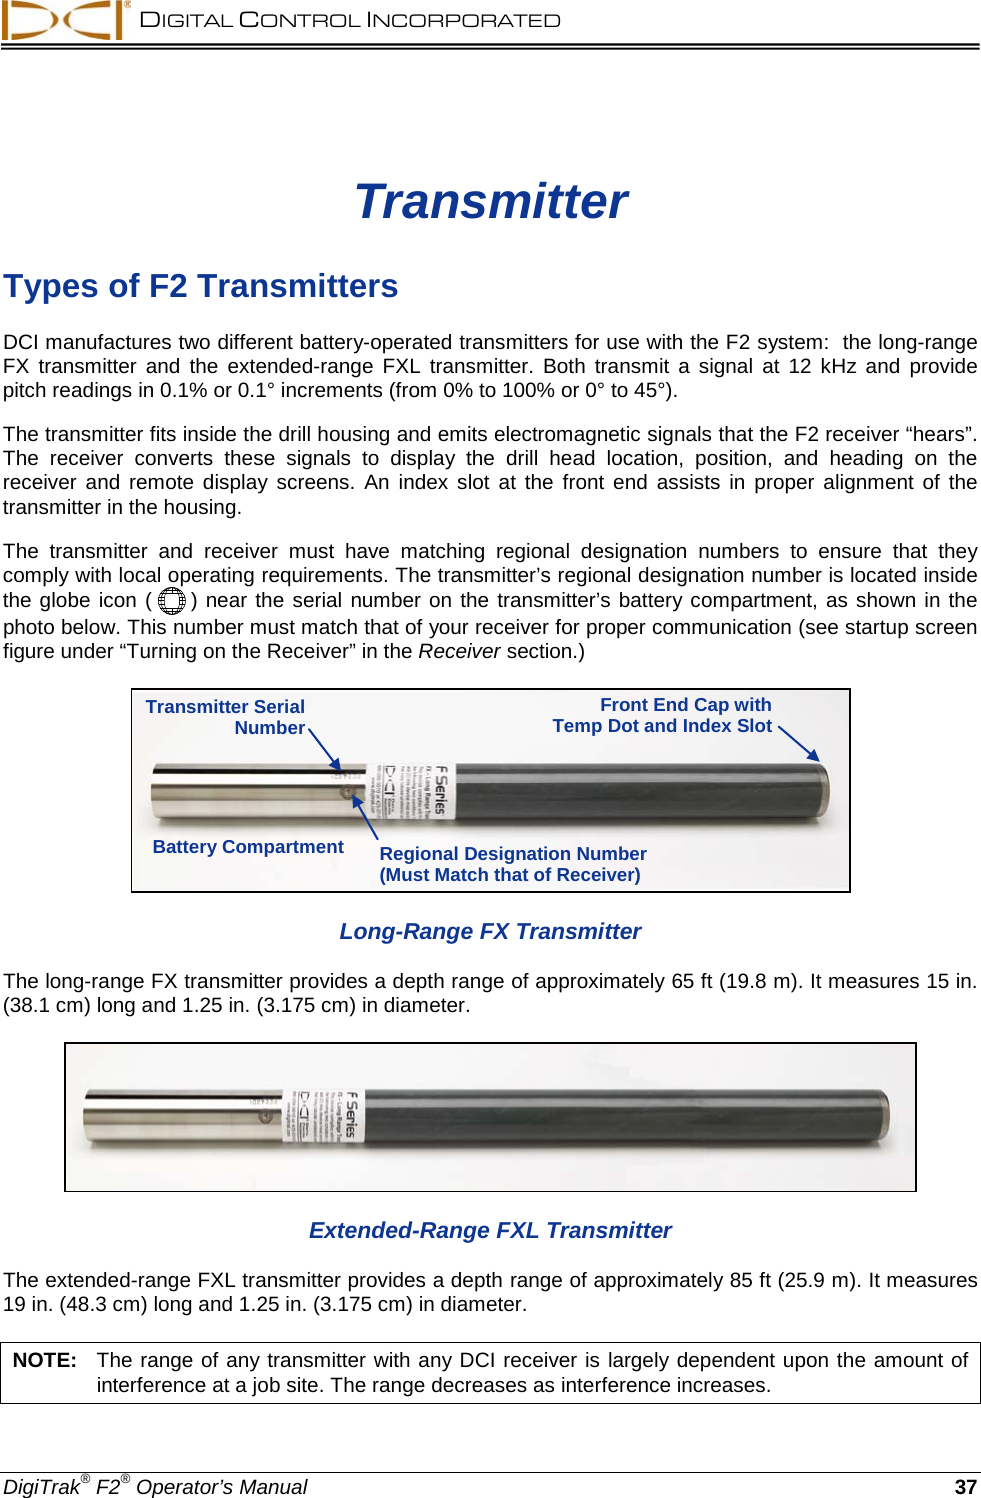  DIGITAL CONTROL INCORPORATED  DigiTrak® F2® Operator’s Manual 37 Transmitter Types of F2 Transmitters DCI manufactures two different battery-operated transmitters for use with the F2 system:  the long-range FX transmitter and the extended-range FXL transmitter.  Both transmit a signal at 12  kHz and provide pitch readings in 0.1% or 0.1° increments (from 0% to 100% or 0° to 45°).  The transmitter fits inside the drill housing and emits electromagnetic signals that the F2 receiver “hears”. The receiver converts  these signals to display the drill head location, position, and heading on the receiver and remote display screens.  An index slot at the front end assists in proper alignment of the transmitter in the housing.  The transmitter and receiver must have matching regional  designation numbers to ensure that they comply with local operating requirements. The transmitter’s regional designation number is located inside the globe icon (  ) near the serial number on the transmitter’s battery compartment, as shown in the photo below. This number must match that of your receiver for proper communication (see startup screen figure under “Turning on the Receiver” in the Receiver section.)  Long-Range FX Transmitter The long-range FX transmitter provides a depth range of approximately 65 ft (19.8 m). It measures 15 in. (38.1 cm) long and 1.25 in. (3.175 cm) in diameter.   Extended-Range FXL Transmitter The extended-range FXL transmitter provides a depth range of approximately 85 ft (25.9 m). It measures 19 in. (48.3 cm) long and 1.25 in. (3.175 cm) in diameter.  NOTE:   The range of any transmitter with any DCI receiver is largely dependent upon the amount of interference at a job site. The range decreases as interference increases. Transmitter Serial Number Regional Designation Number (Must Match that of Receiver) Battery Compartment Front End Cap with Temp Dot and Index Slot 